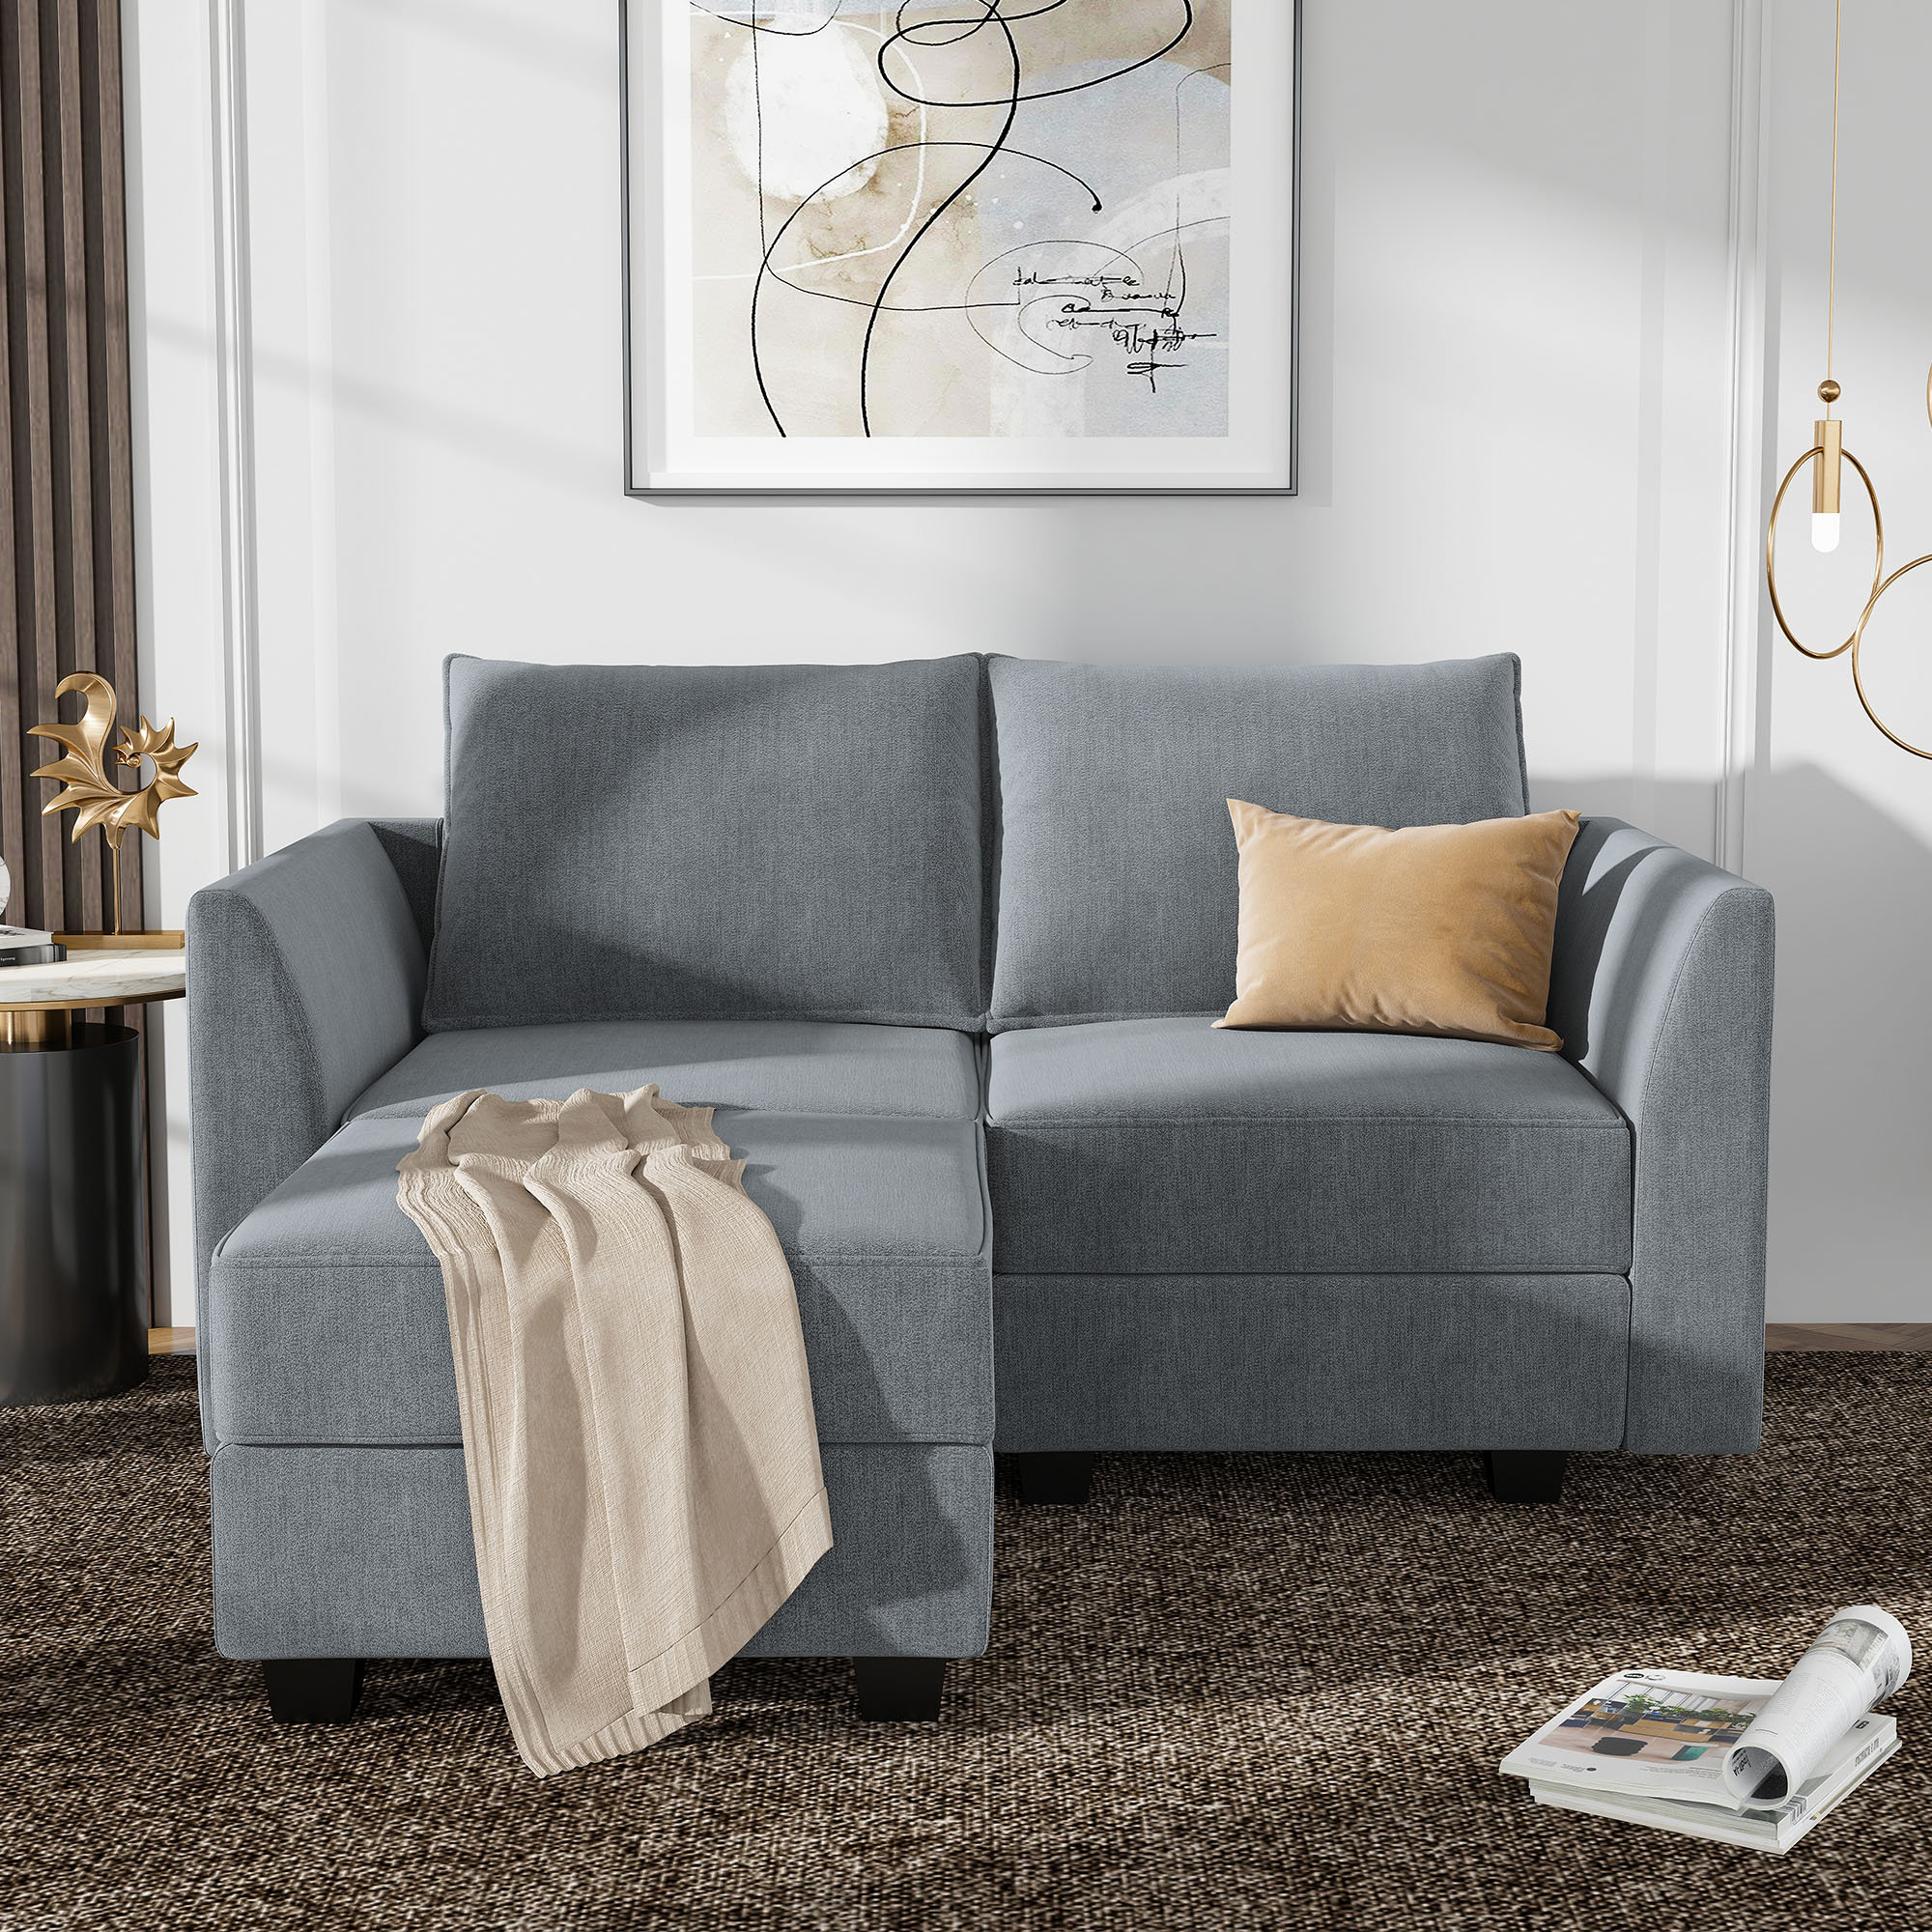 Honbay Modular 2-seater Sectional Sofa With Storage L Shaped Sofa Chaise For Small Space